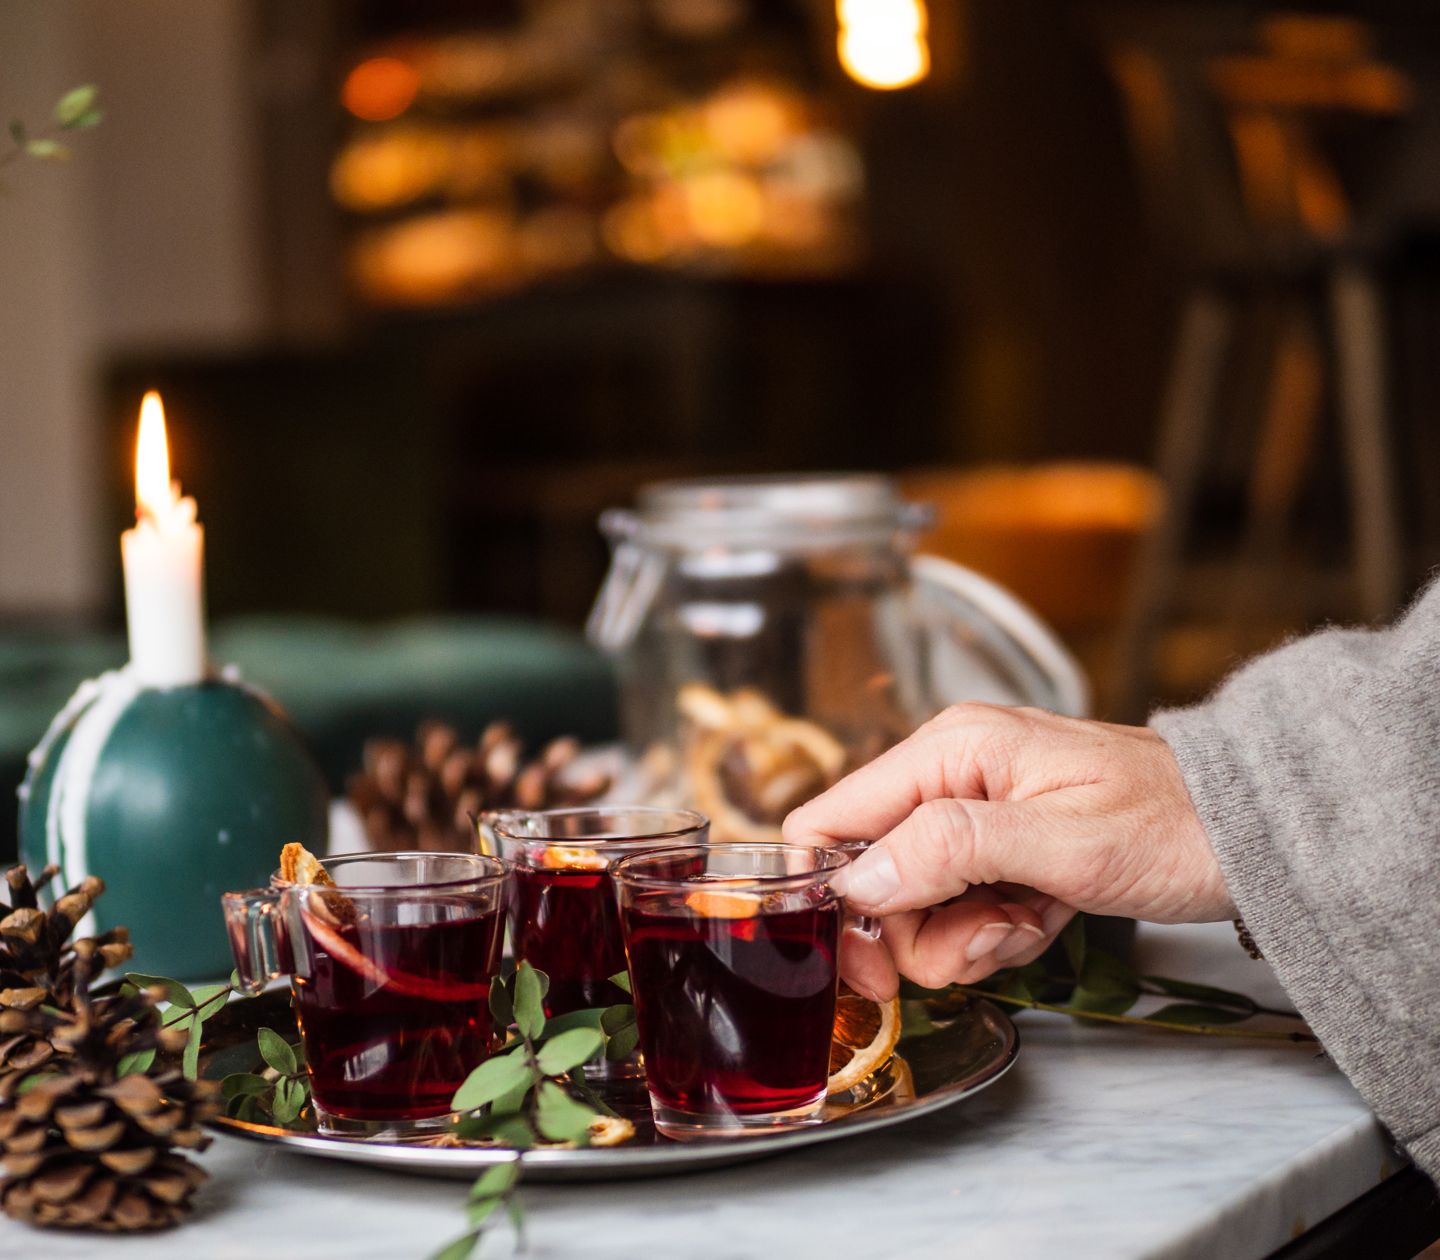 A hand reaching for a glass of mulled wine standing on a golden tray